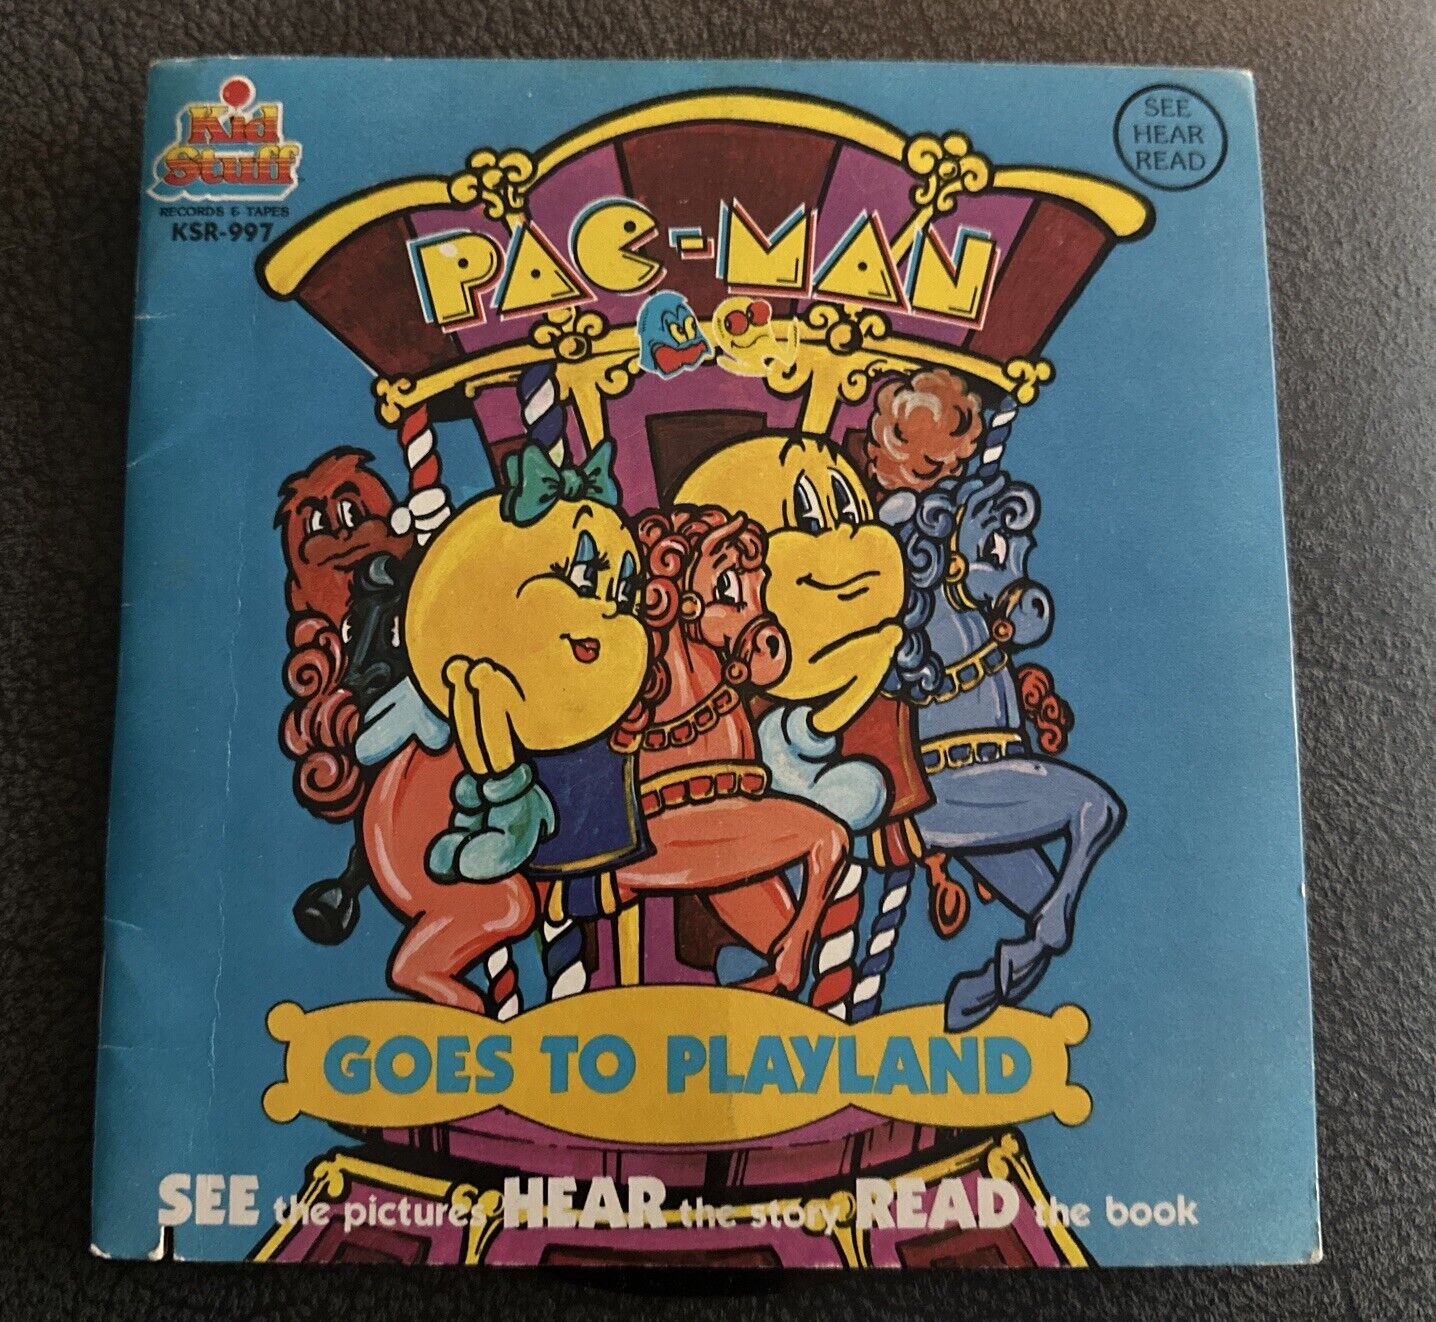 Pac-Man Goes To Playland BOOK and RECORD KID STUFF 995 VG+ 1980 Arcade 80’s Rare